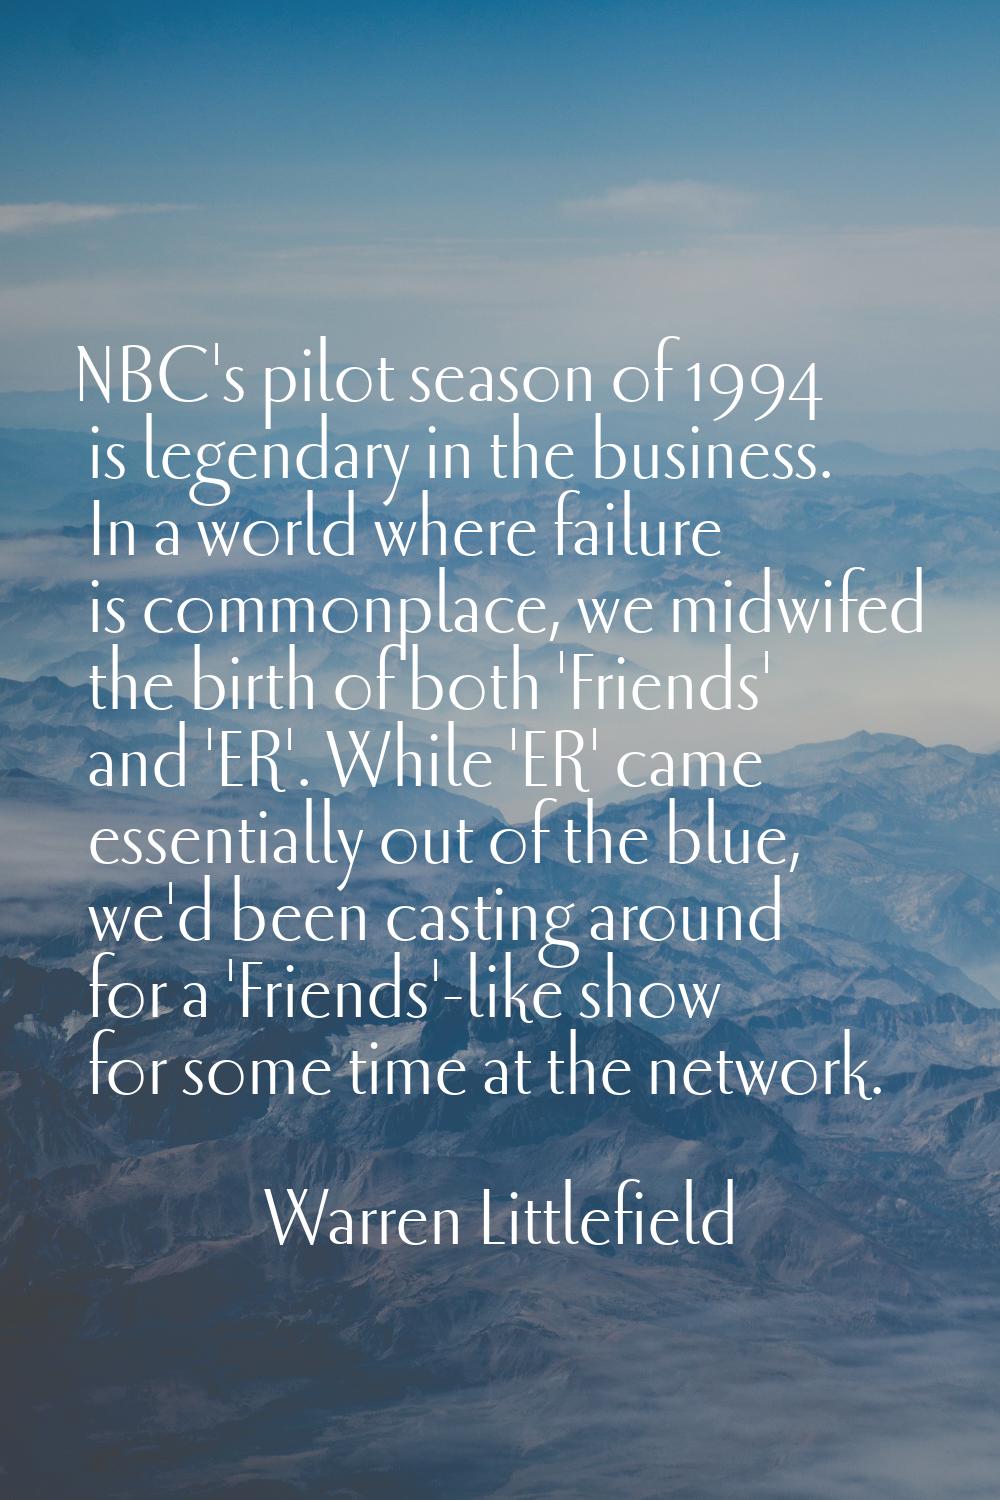 NBC's pilot season of 1994 is legendary in the business. In a world where failure is commonplace, w